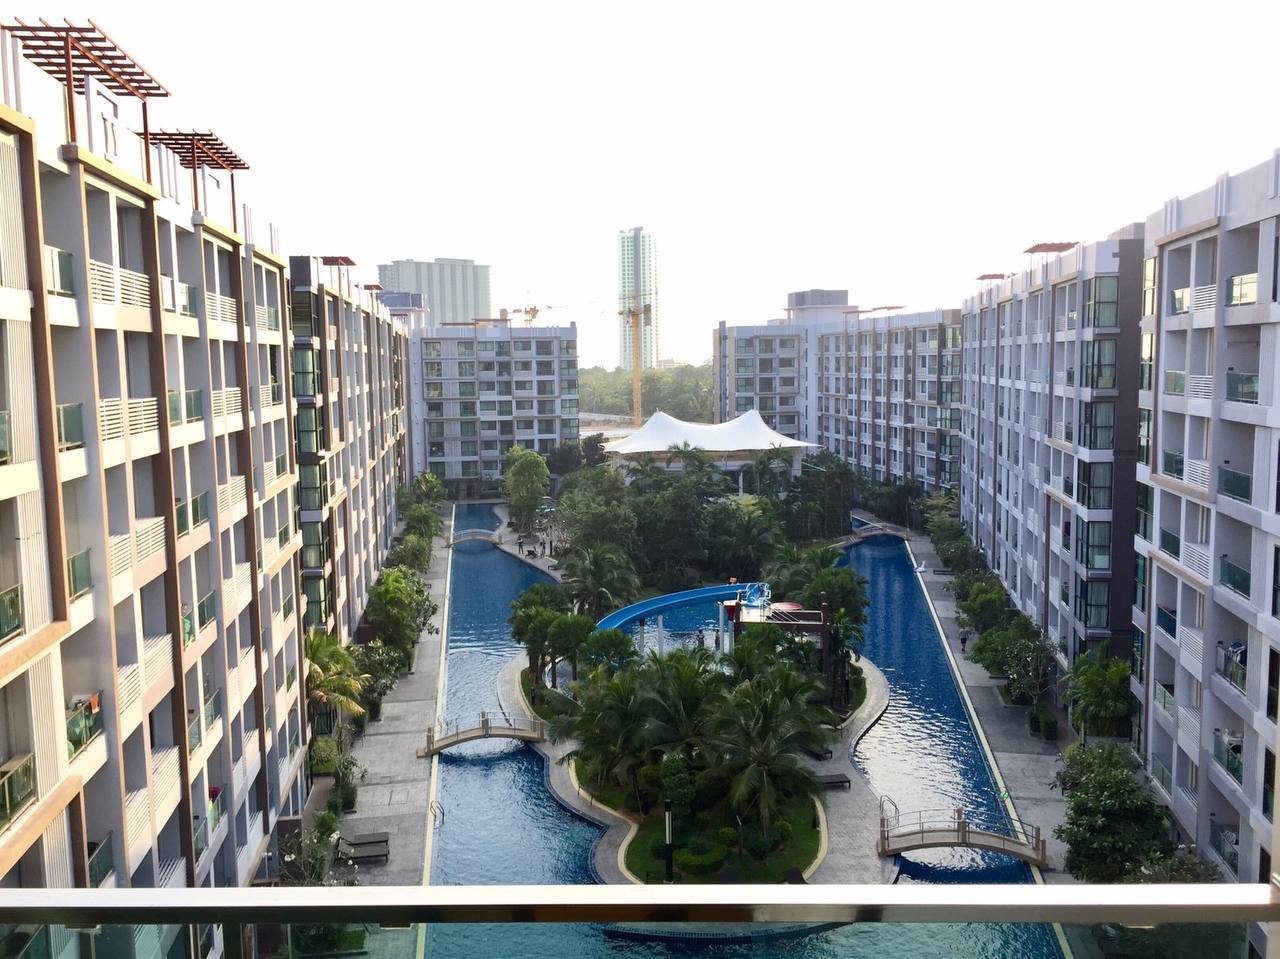 2 bedroom Dusit Grand Park 1 view from the balcony